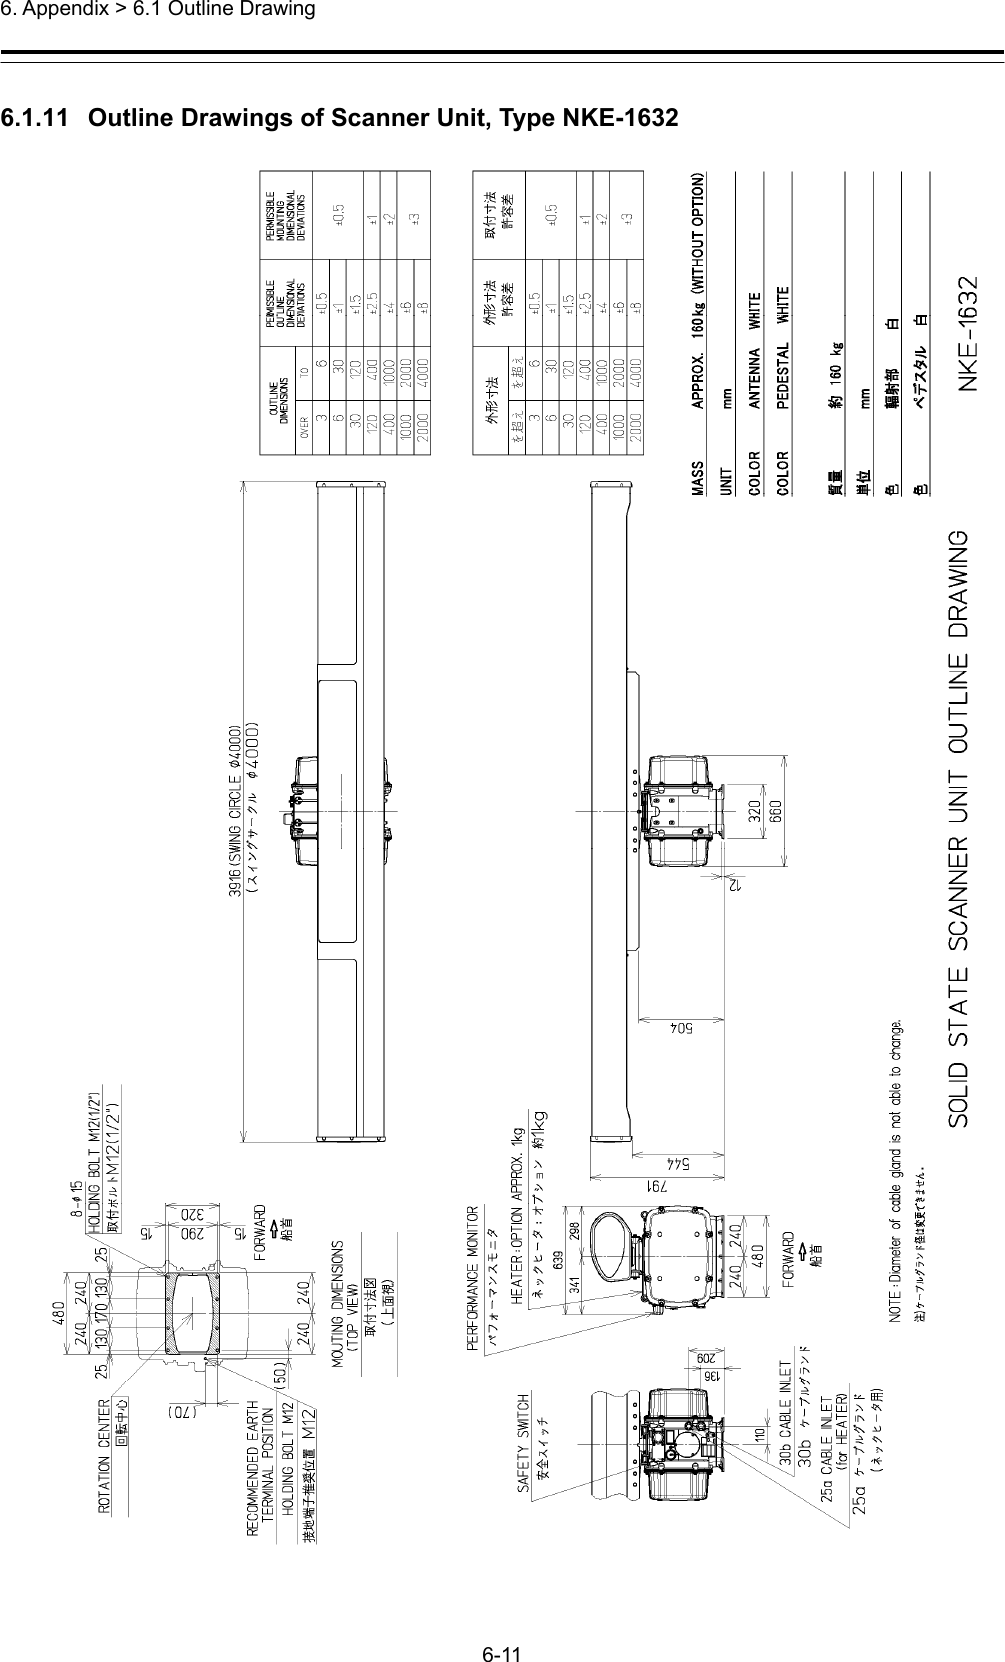  6. Appendix &gt; 6.1 Outline Drawing 6-11  6.1.11   Outline Drawings of Scanner Unit, Type NKE-1632  